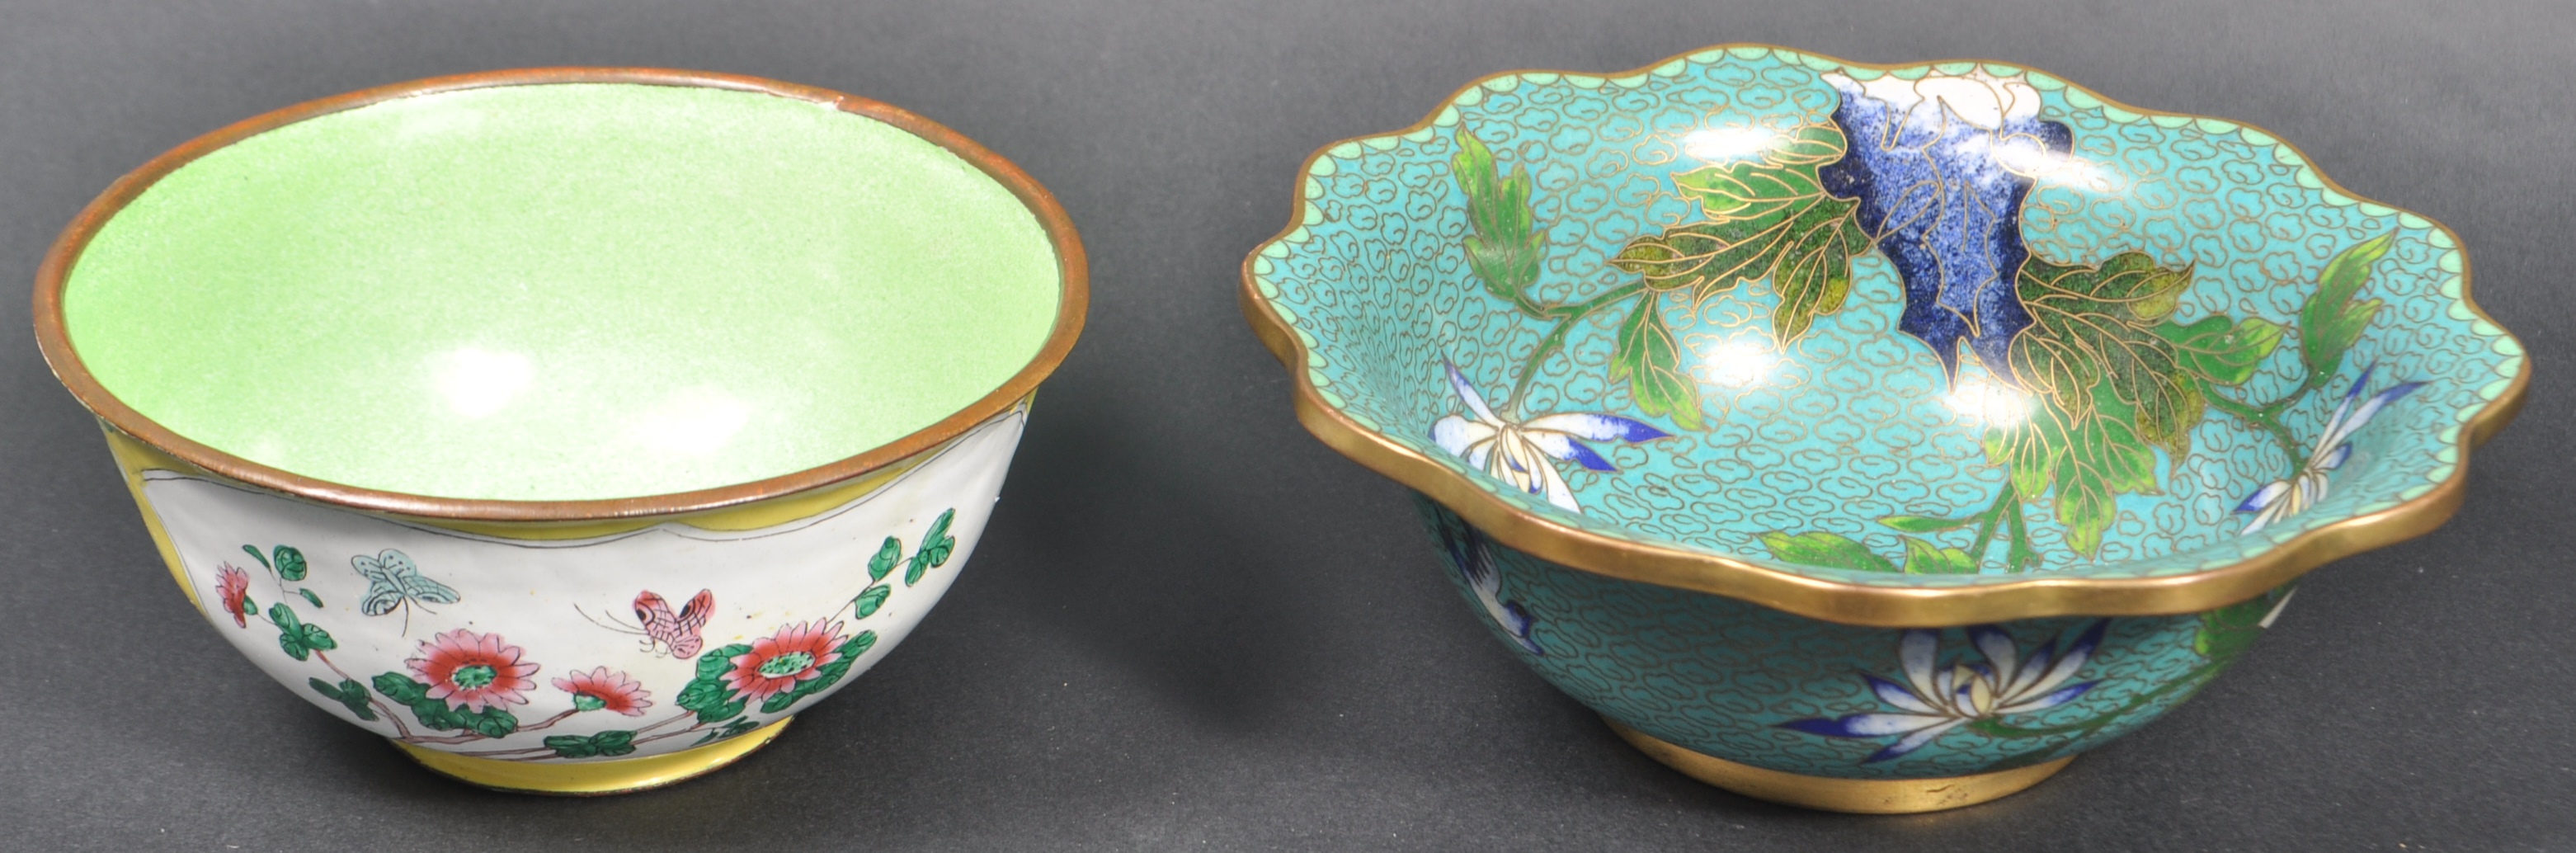 TO EARLY 20TH CENTURY CHINESE CLOISONNE BOWLS - Image 6 of 8